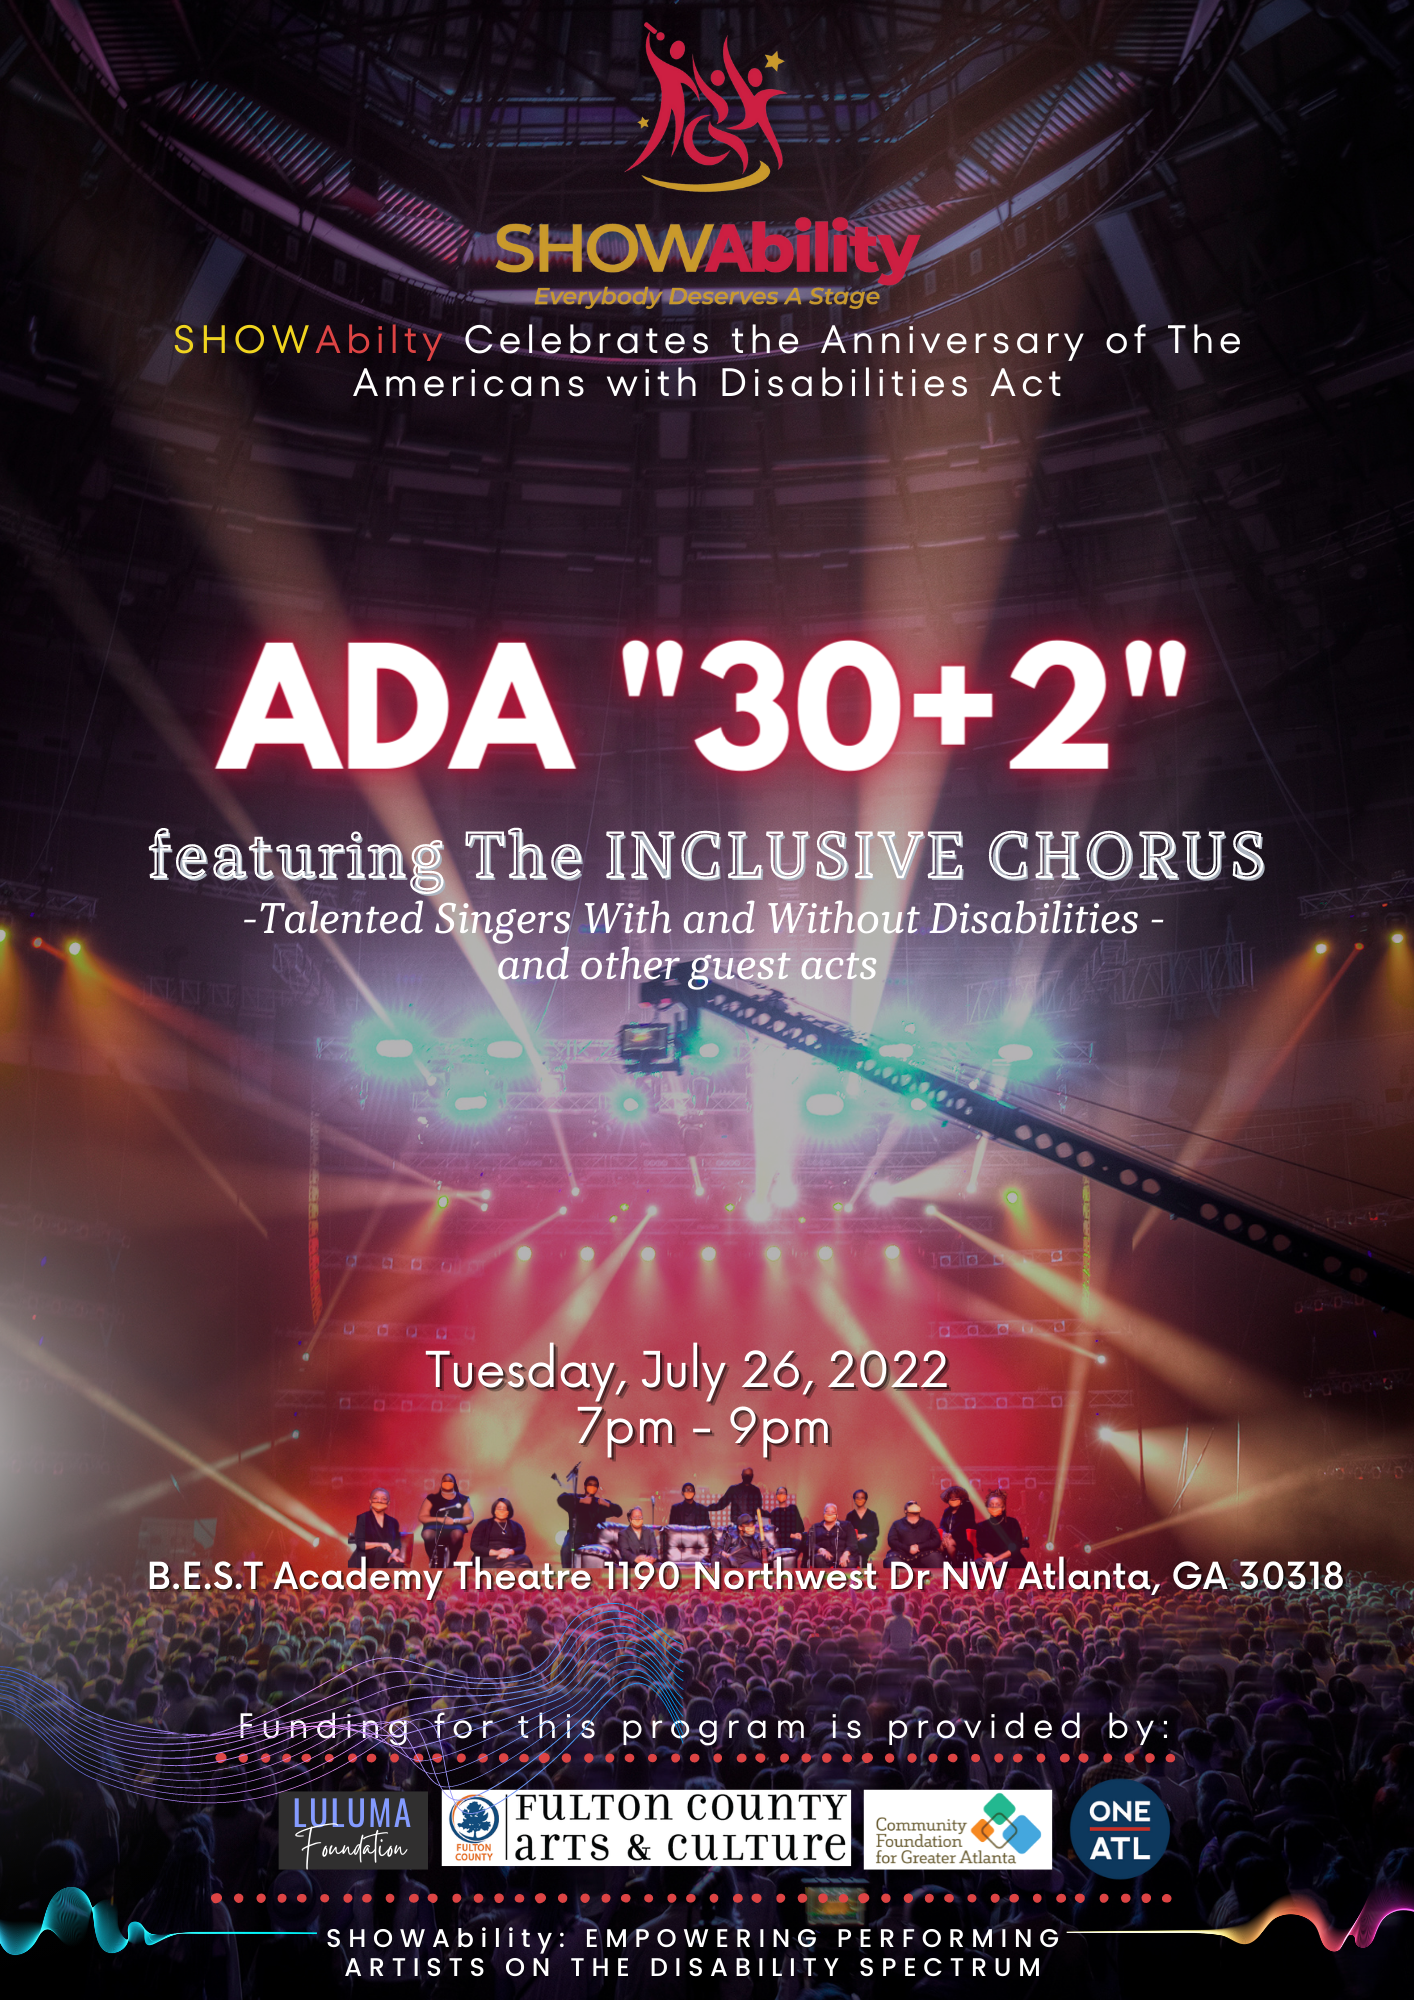 ShowAbility Nonprofit Celebrates ADA 30+2 On July 26, Holding Free Concert Event Featuring Inclusive Chorus, Other Talented Guests Across Disability Spectrum